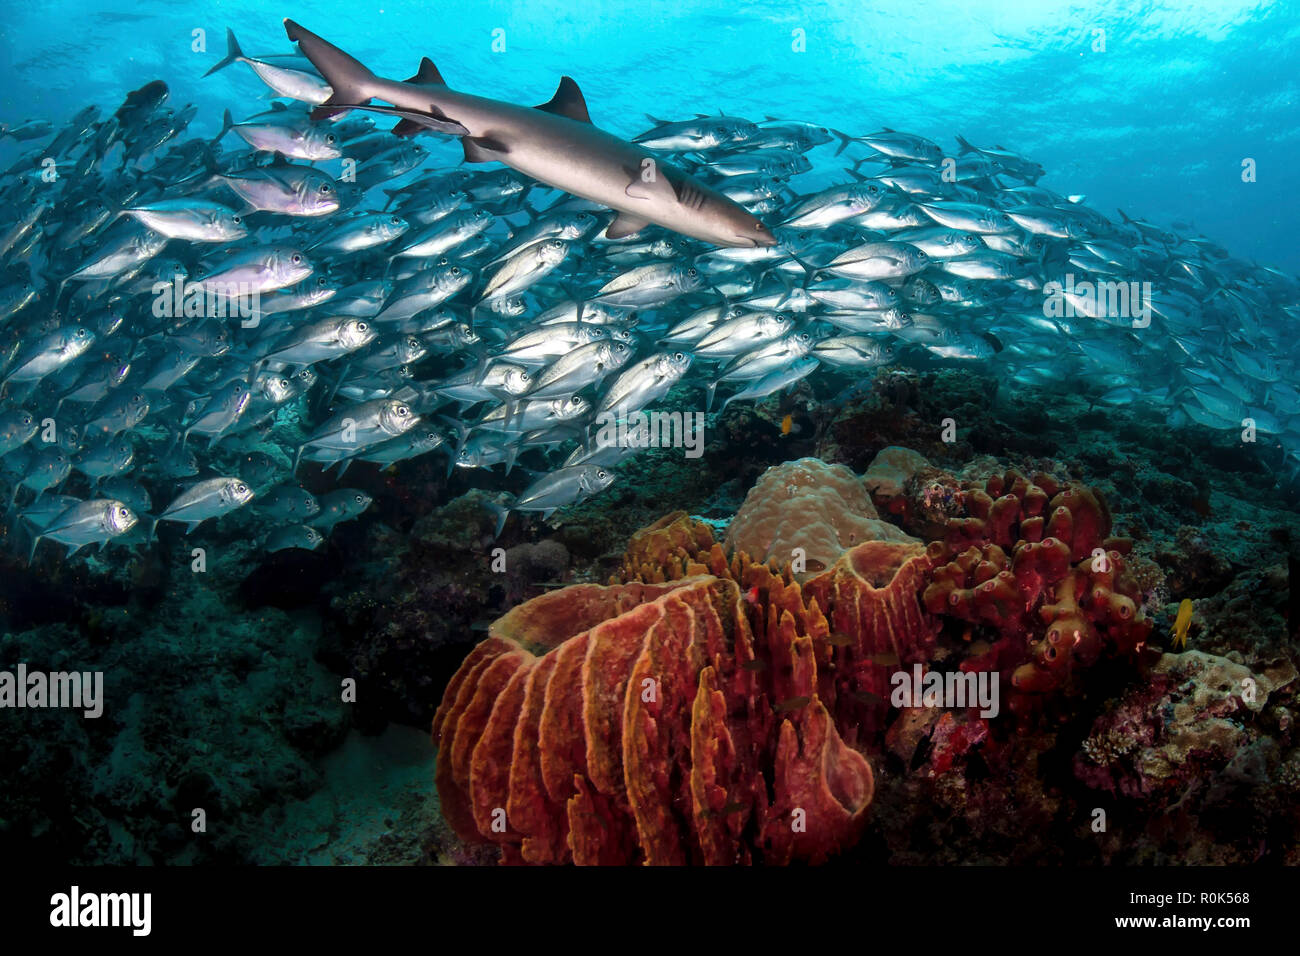 A whitetip reef shark swims in front of a school of bigeye trevally. Stock Photo